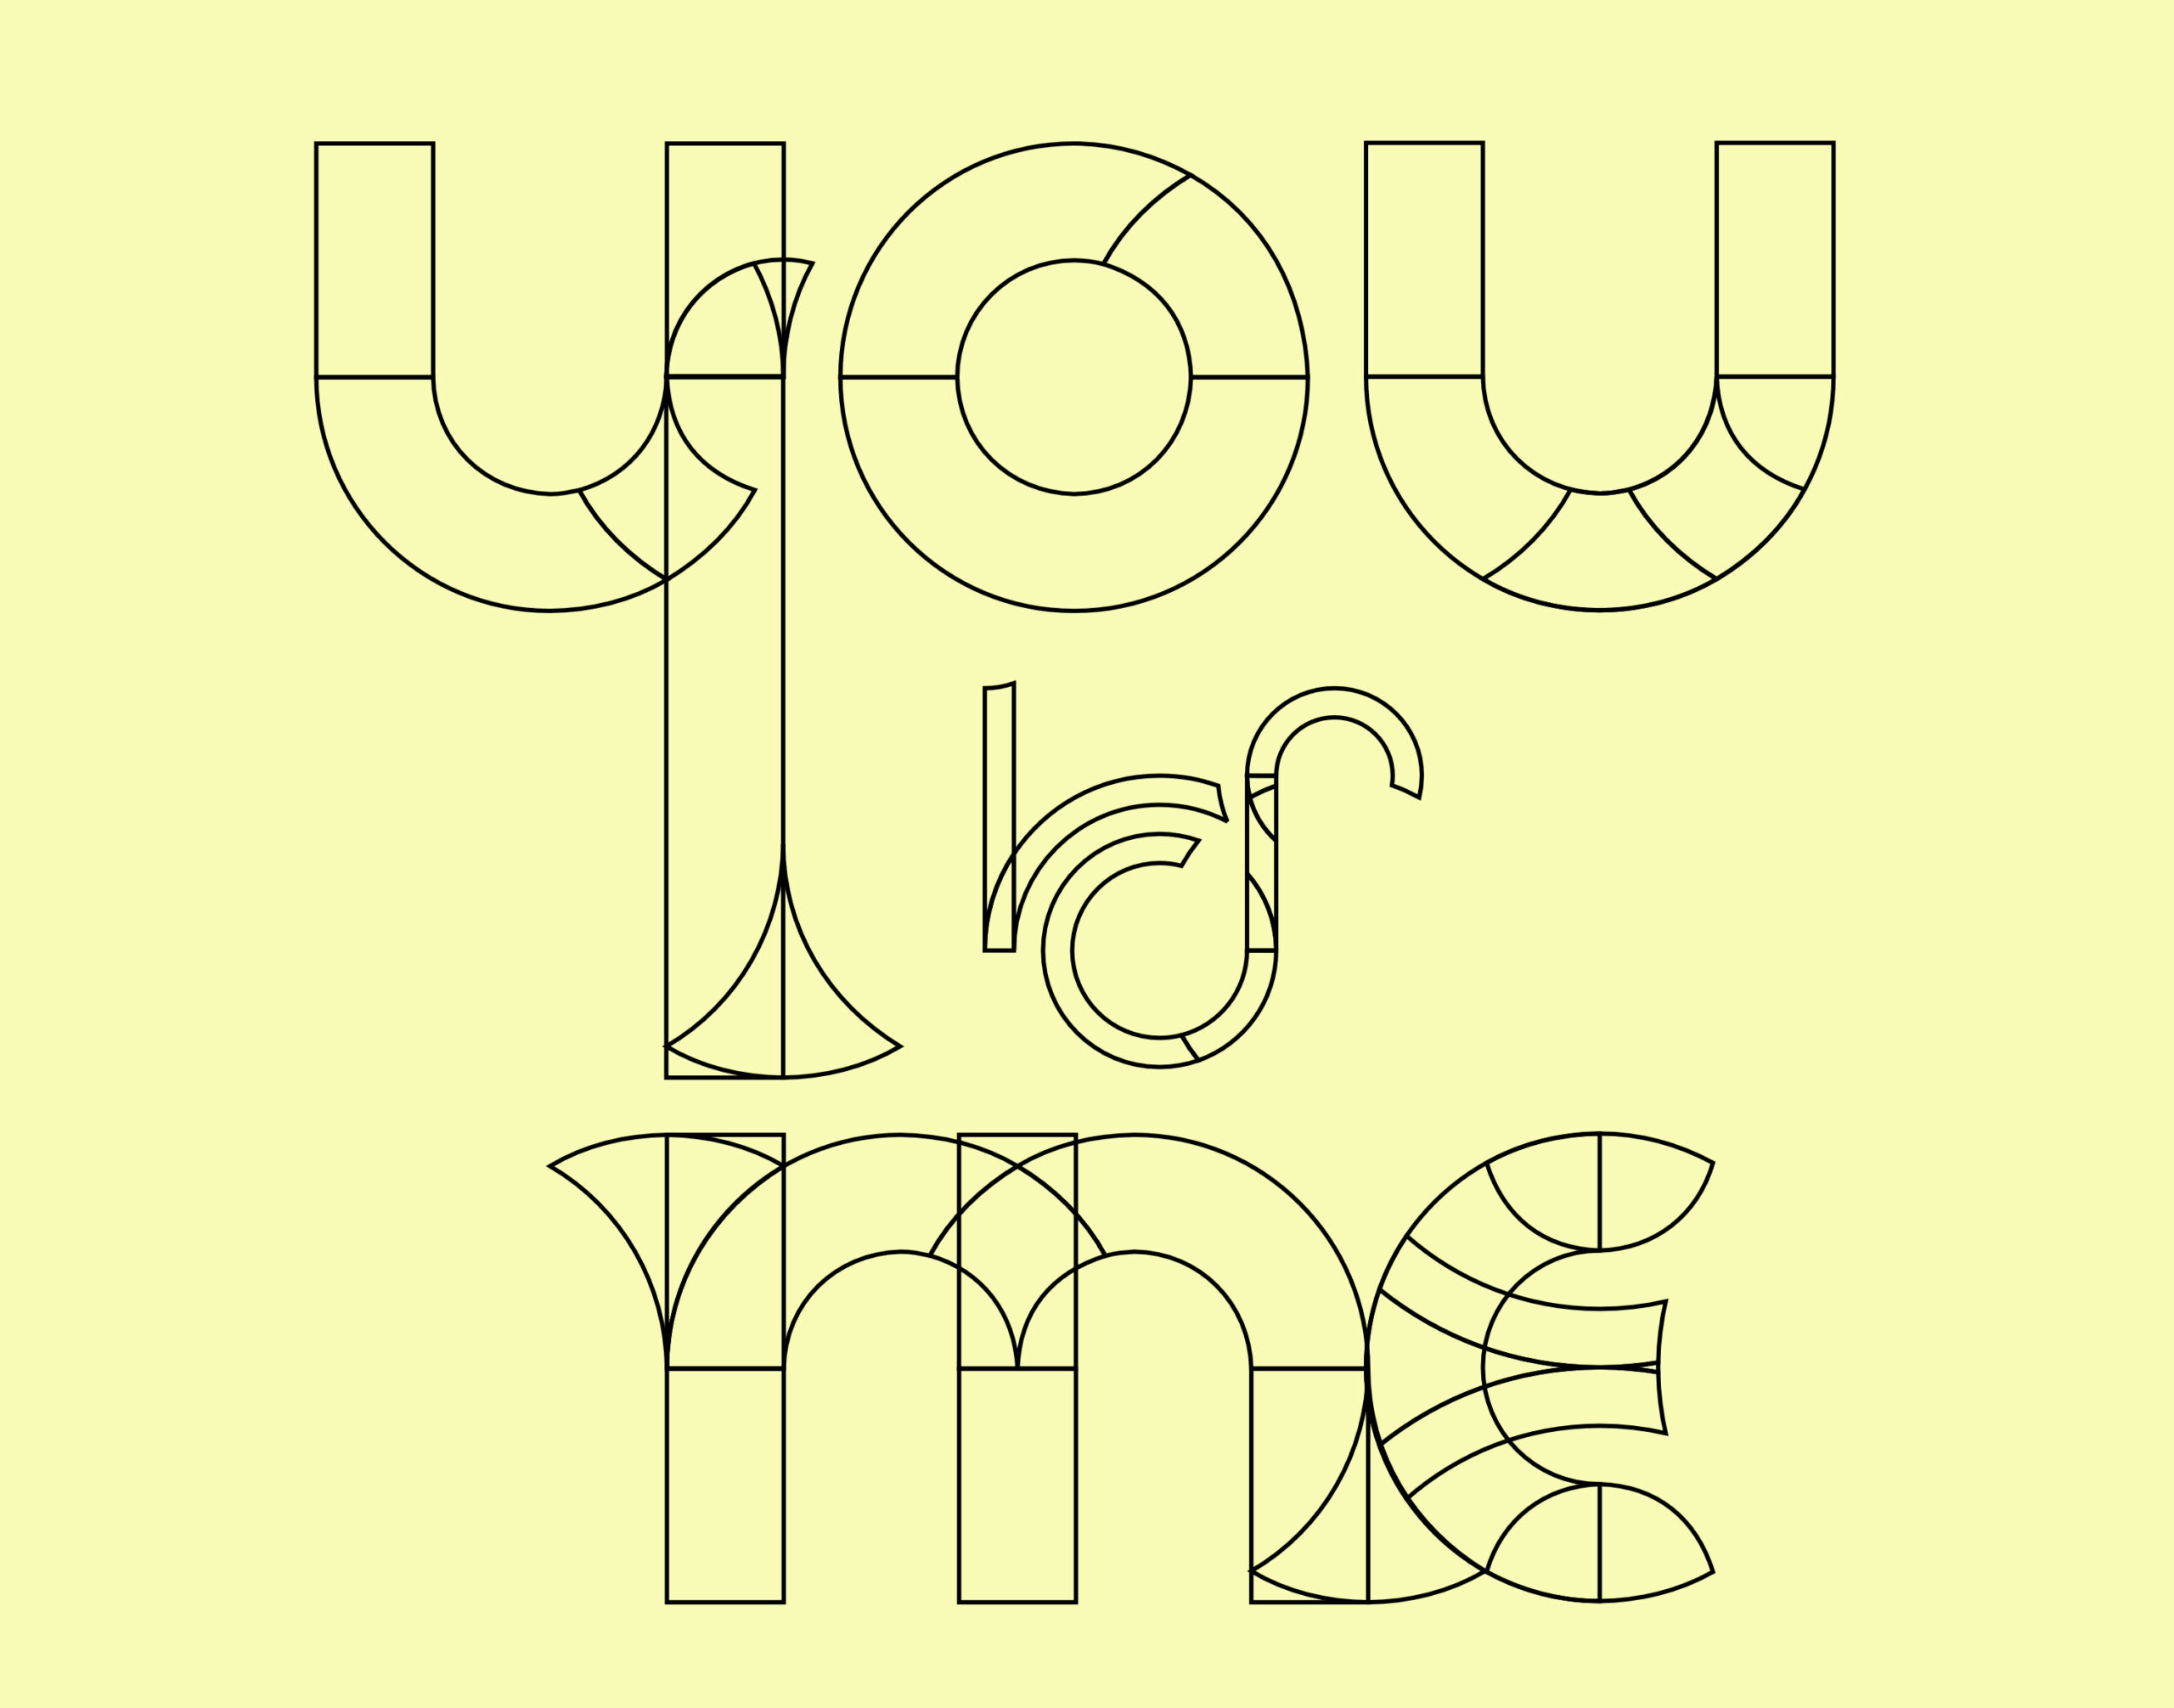 "You vs me" written in fat geometric shapes based on circles and rectangles